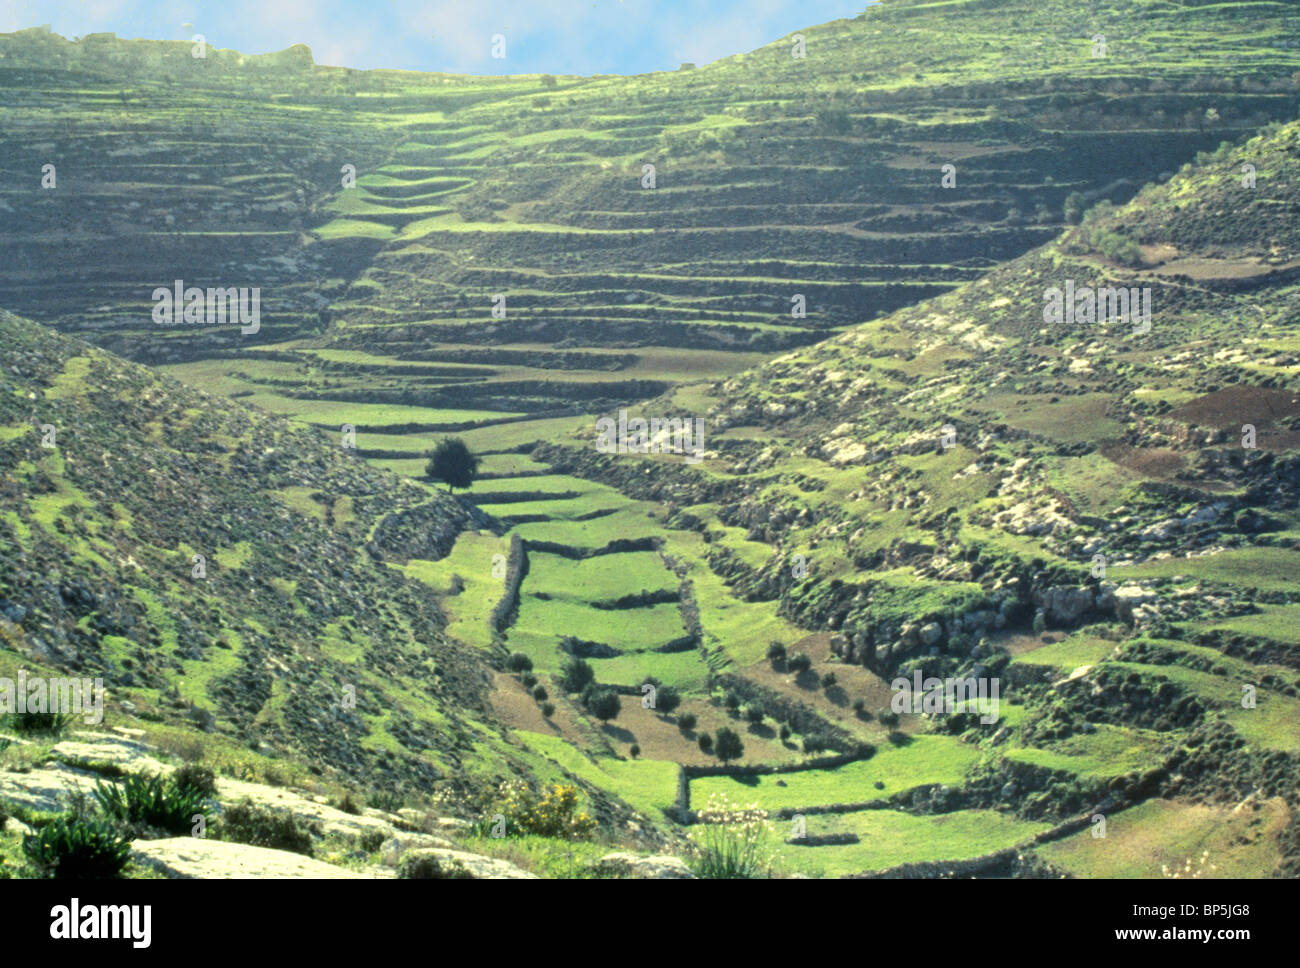 3902. TERRACE AGRICULTURE IN THE ROCKY HILLS OF JUDEA Stock Photo